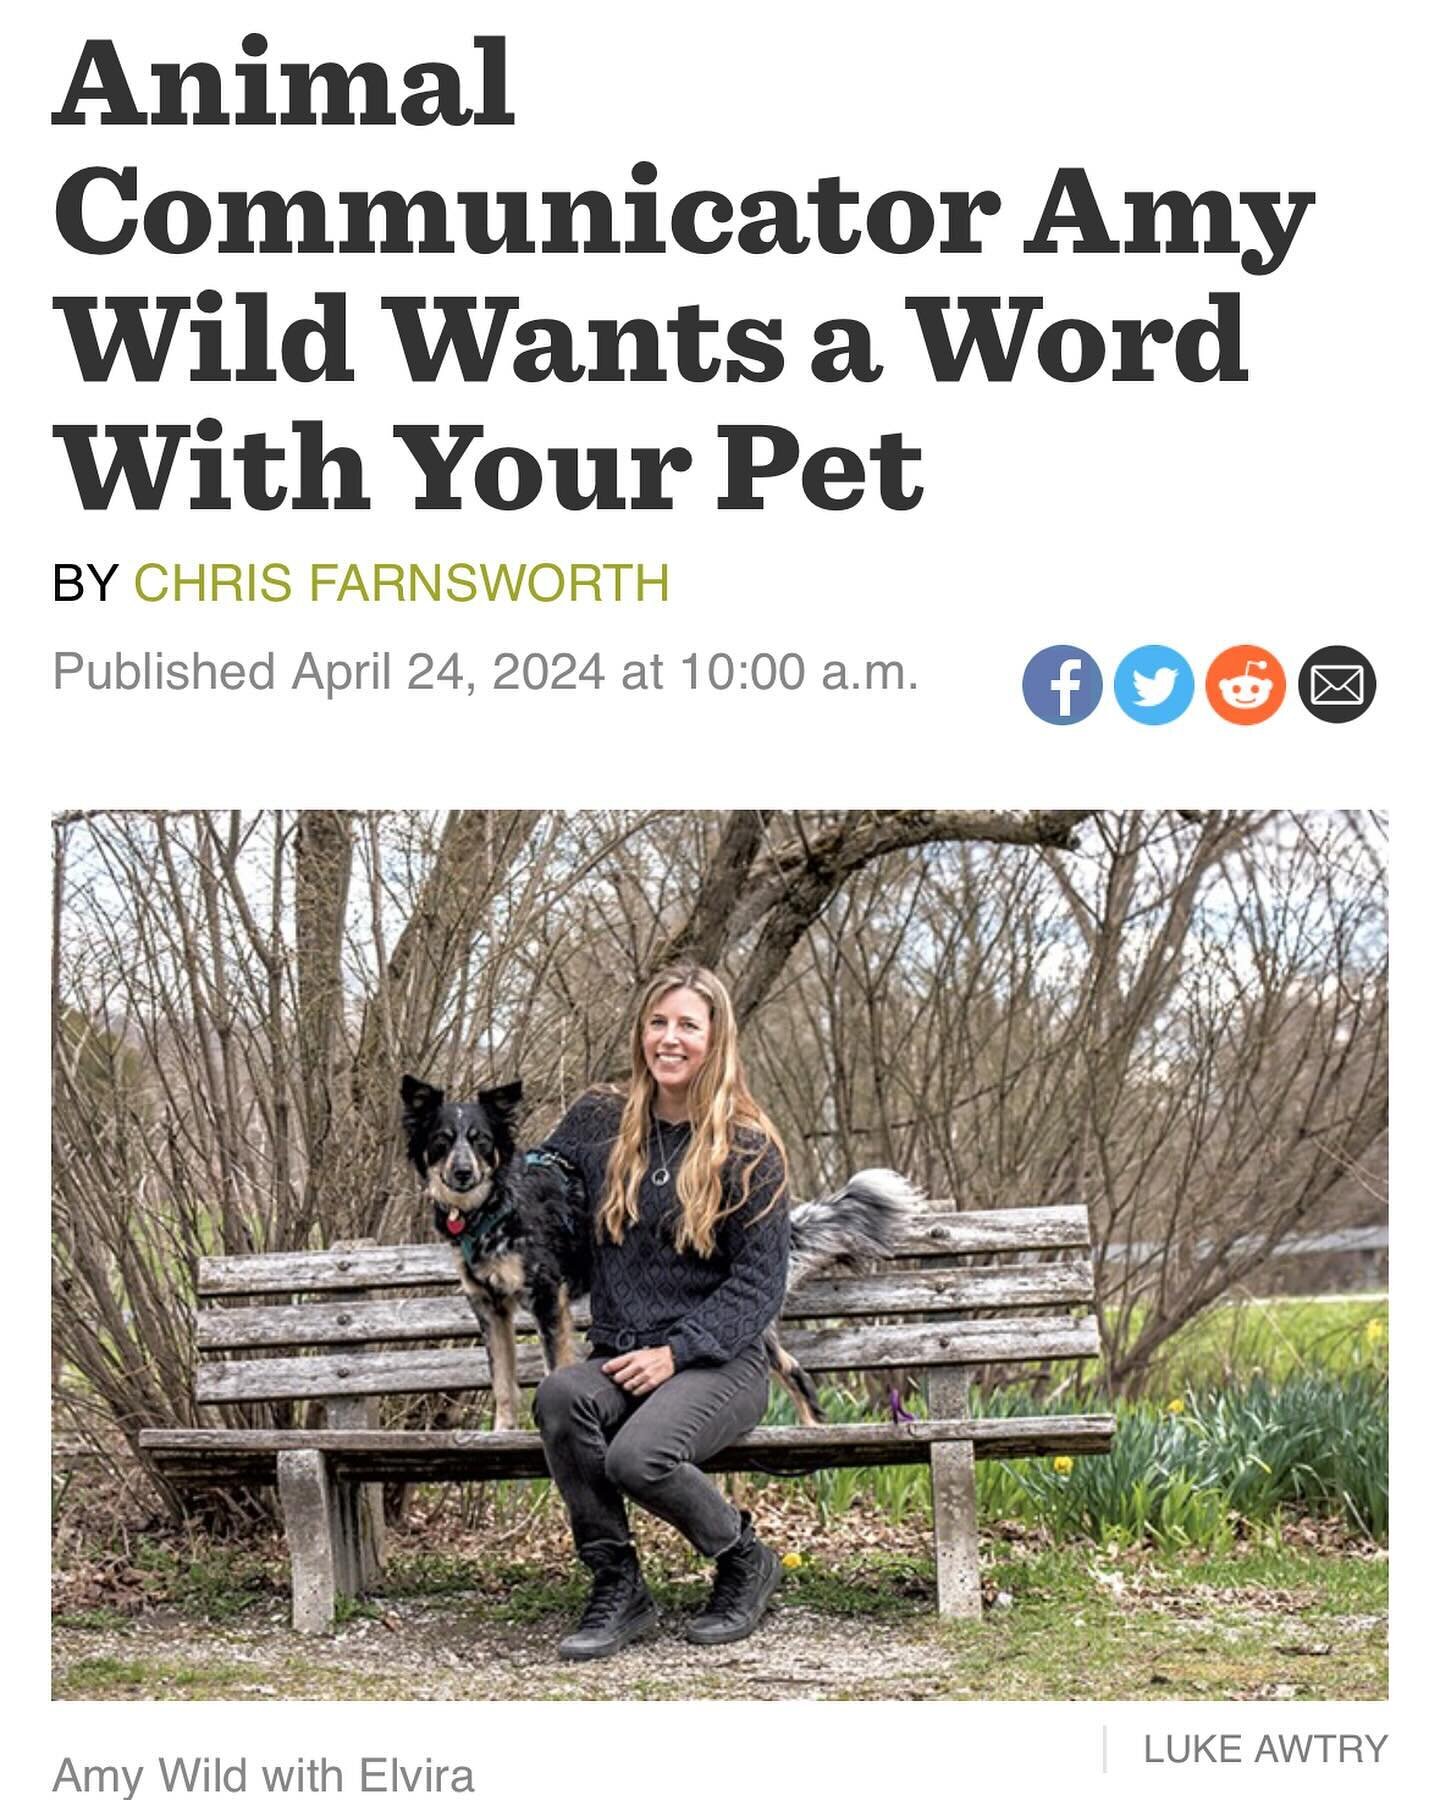 📰Elvira made the papers!

Thanks to @sevendaysvt for featuring me in the Animal Issue, to @farnsworthprime for making it all happen and letting me chat with Wilbur, and to @lukeawtryphotography for the eventful photoshoot!

Article at sevendaysvt.co